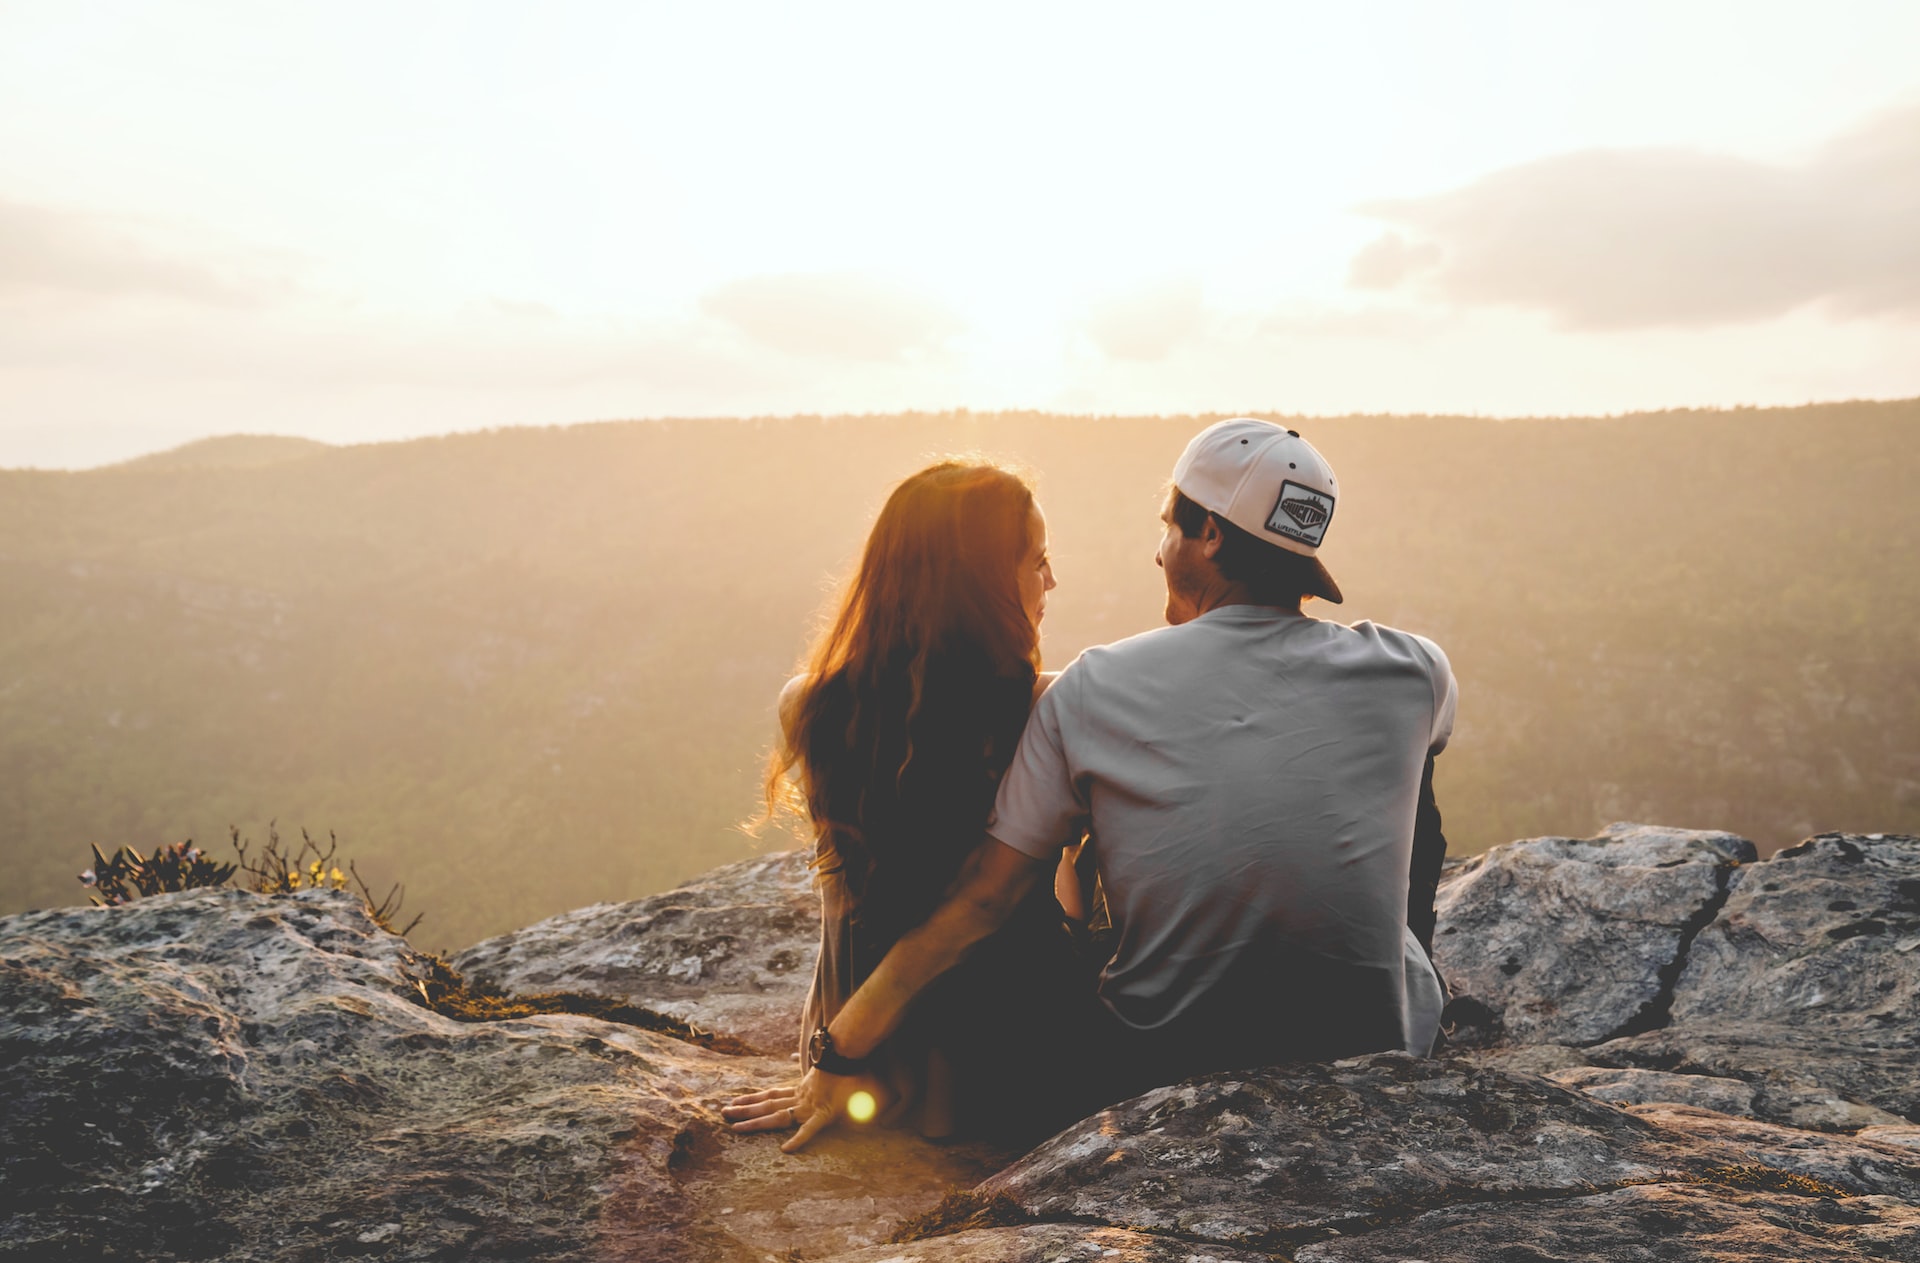 ￼Simple and Affordable Date Ideas to Keep the Romance Alive